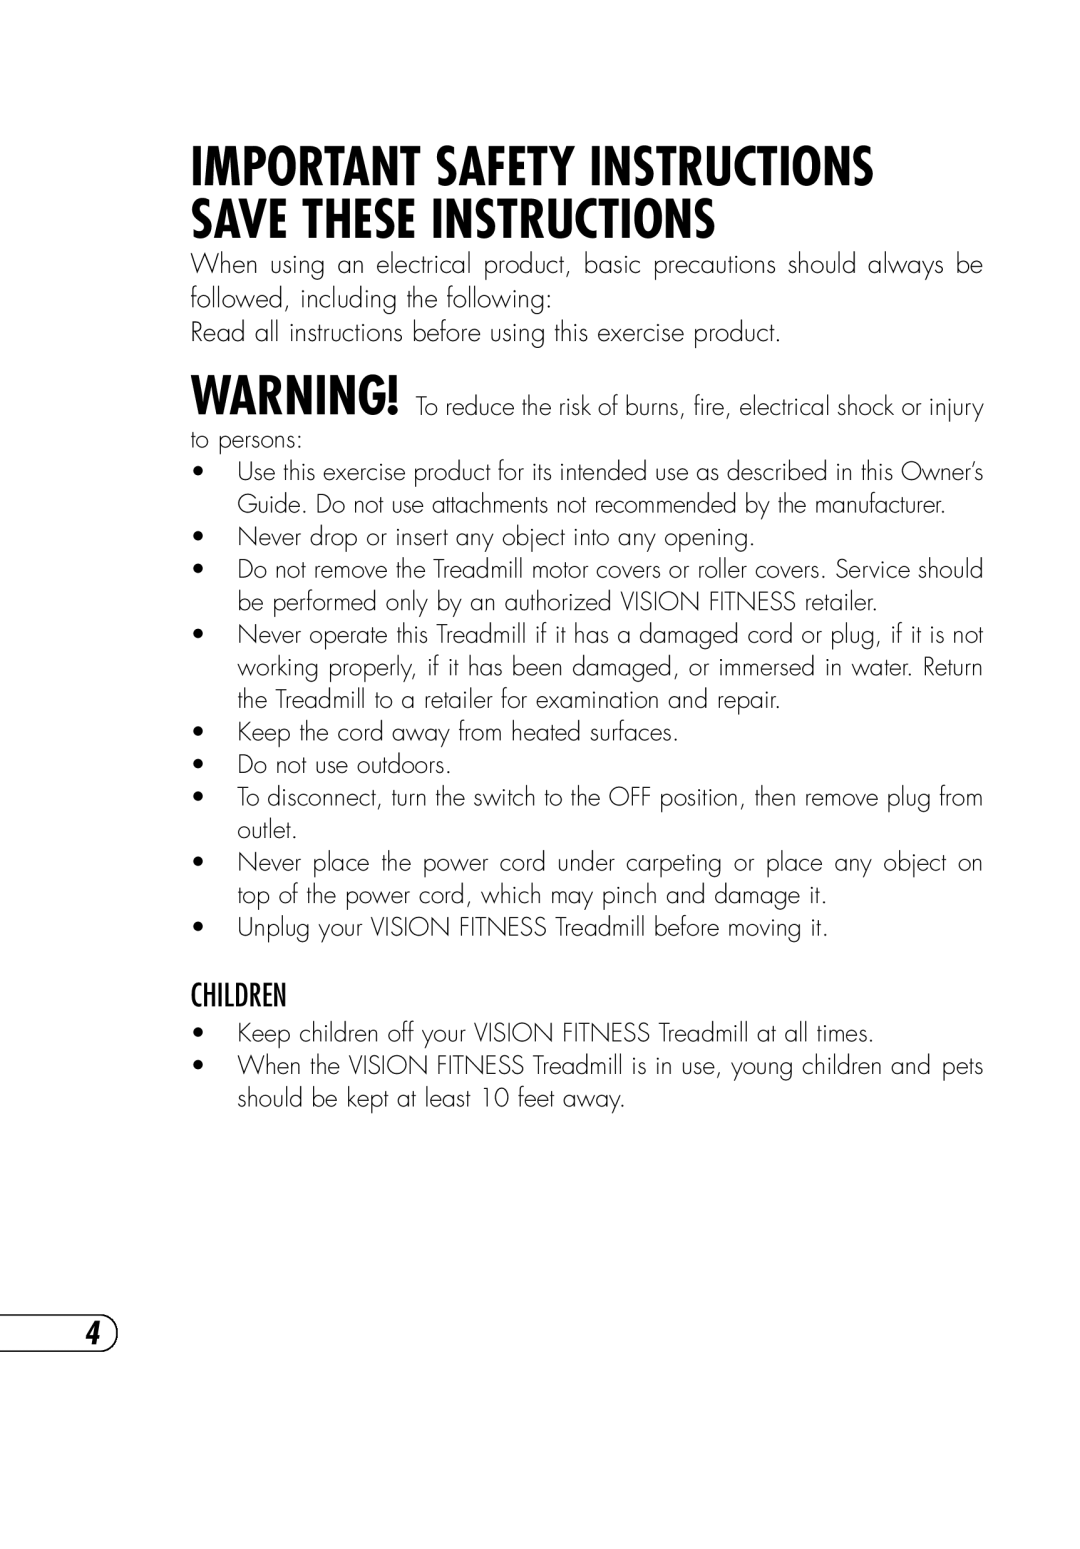 Vision Fitness T9700 Runner's manual Important Safety Instructions Save These Instructions, Children 